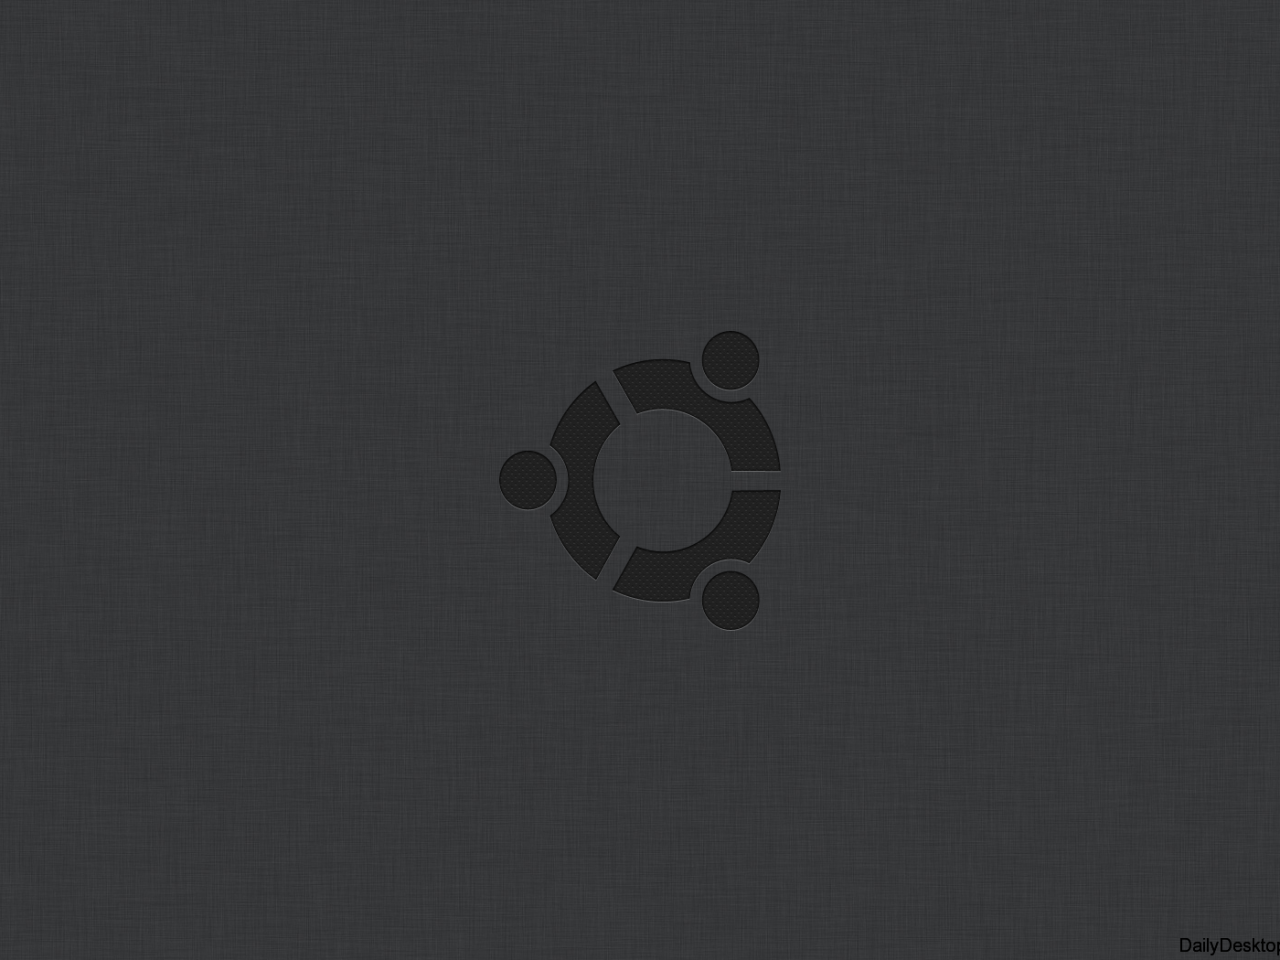 Wallpaper Ubuntu Black Are In Different Resolutions And